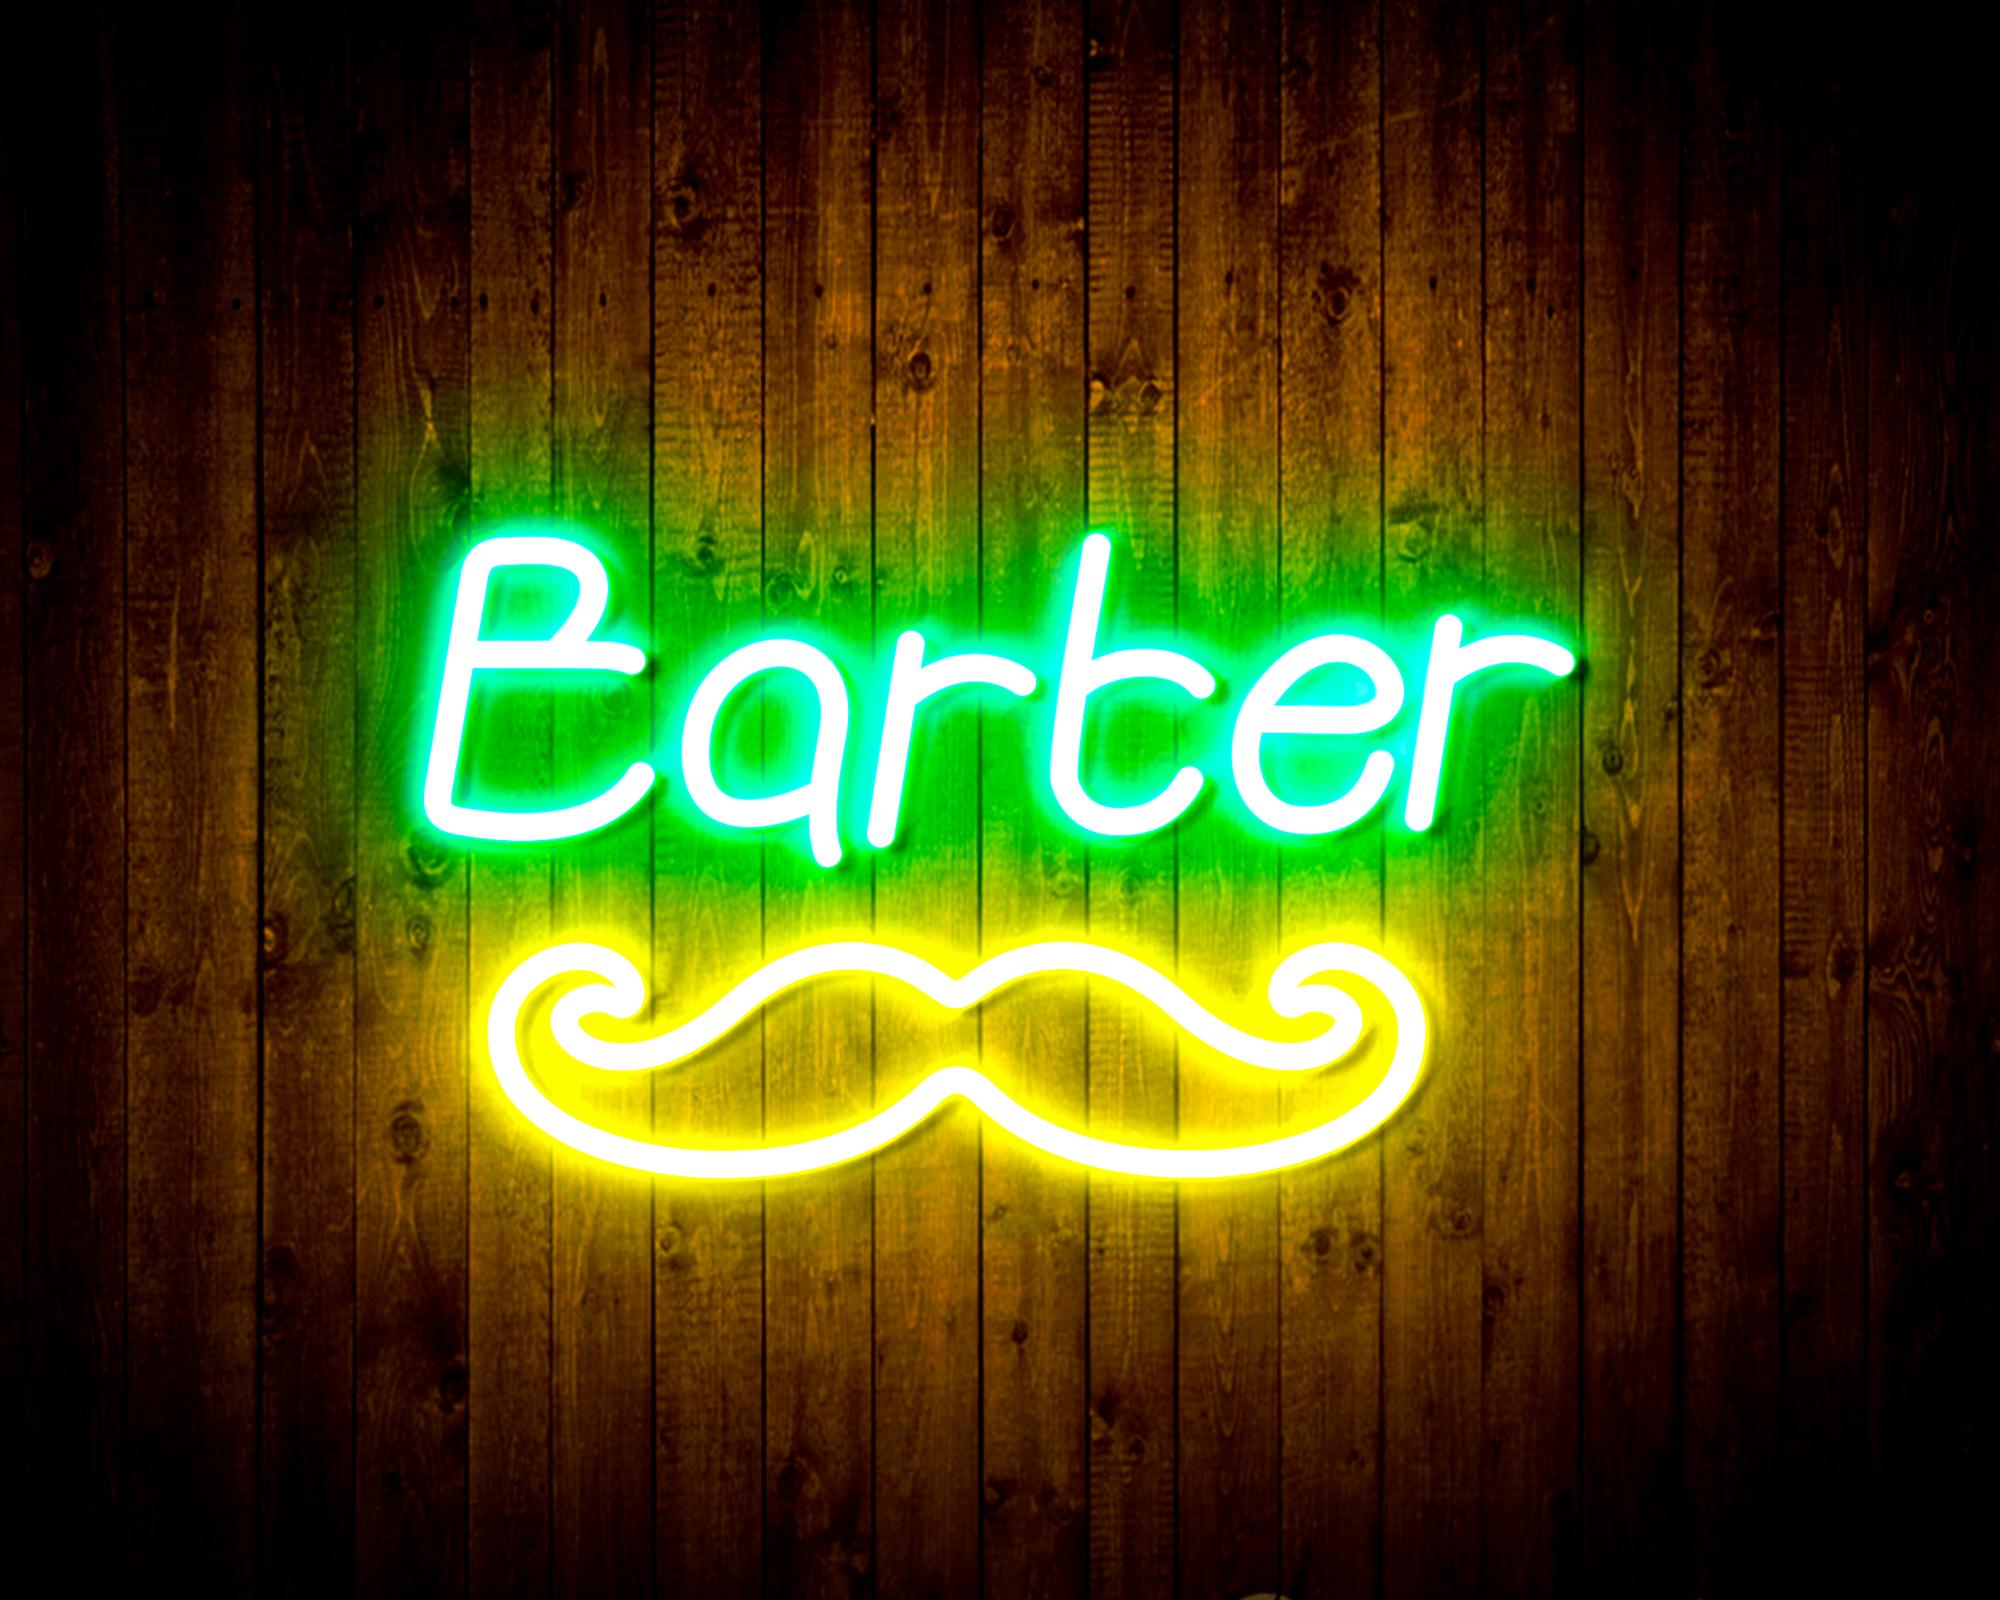 Barber with Moustache LED Neon Sign Wall Light